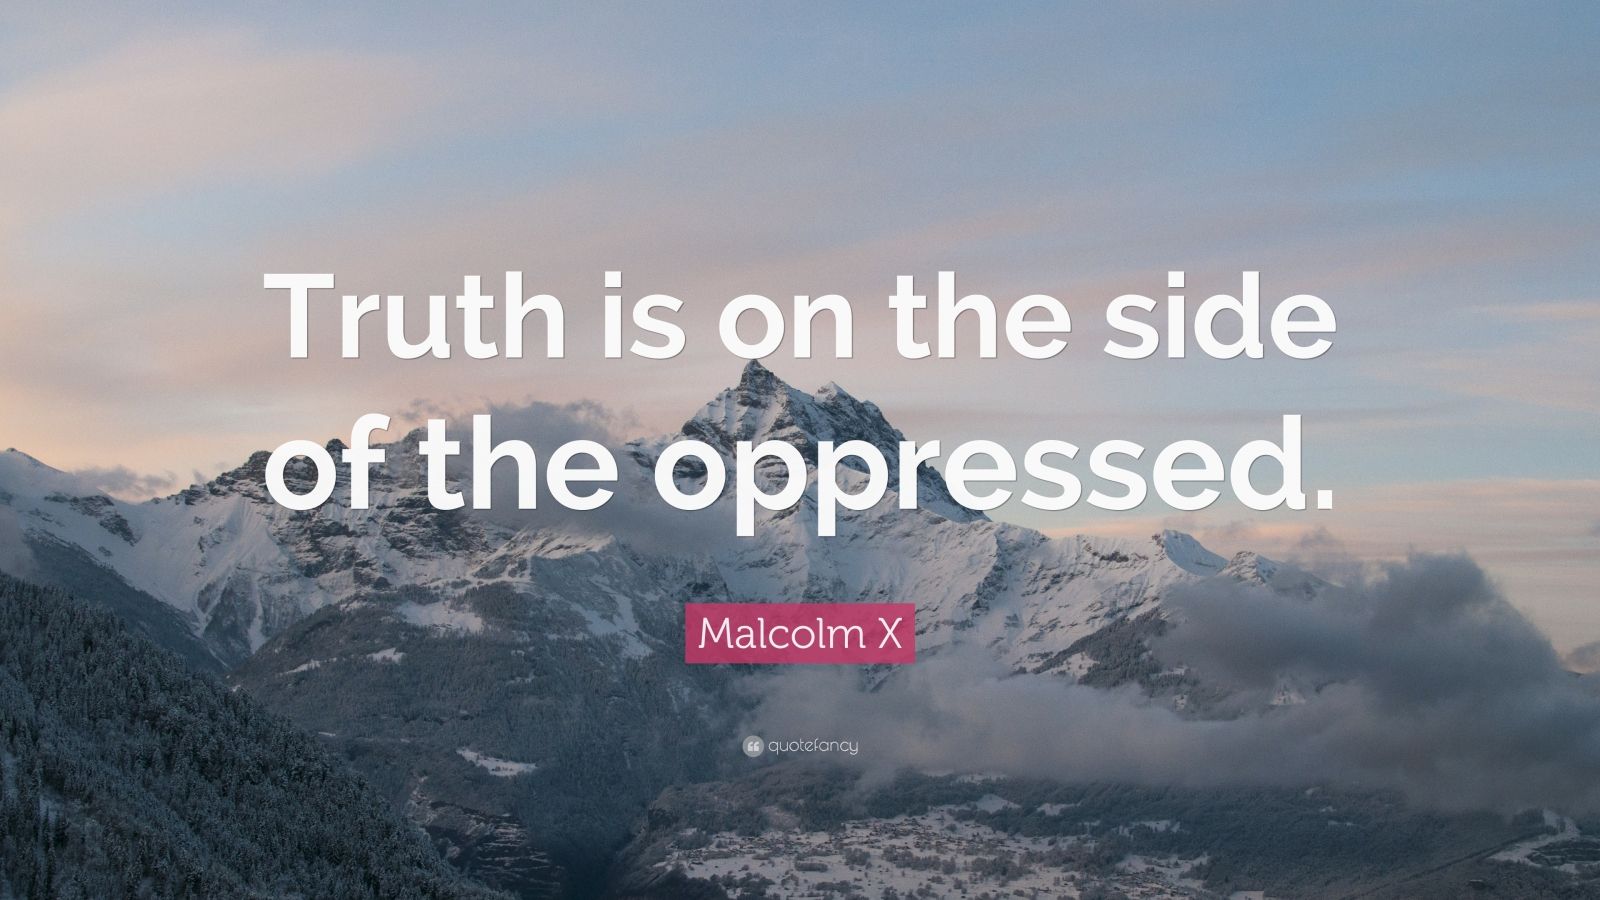 Malcolm X Quote: "Truth is on the side of the oppressed ...